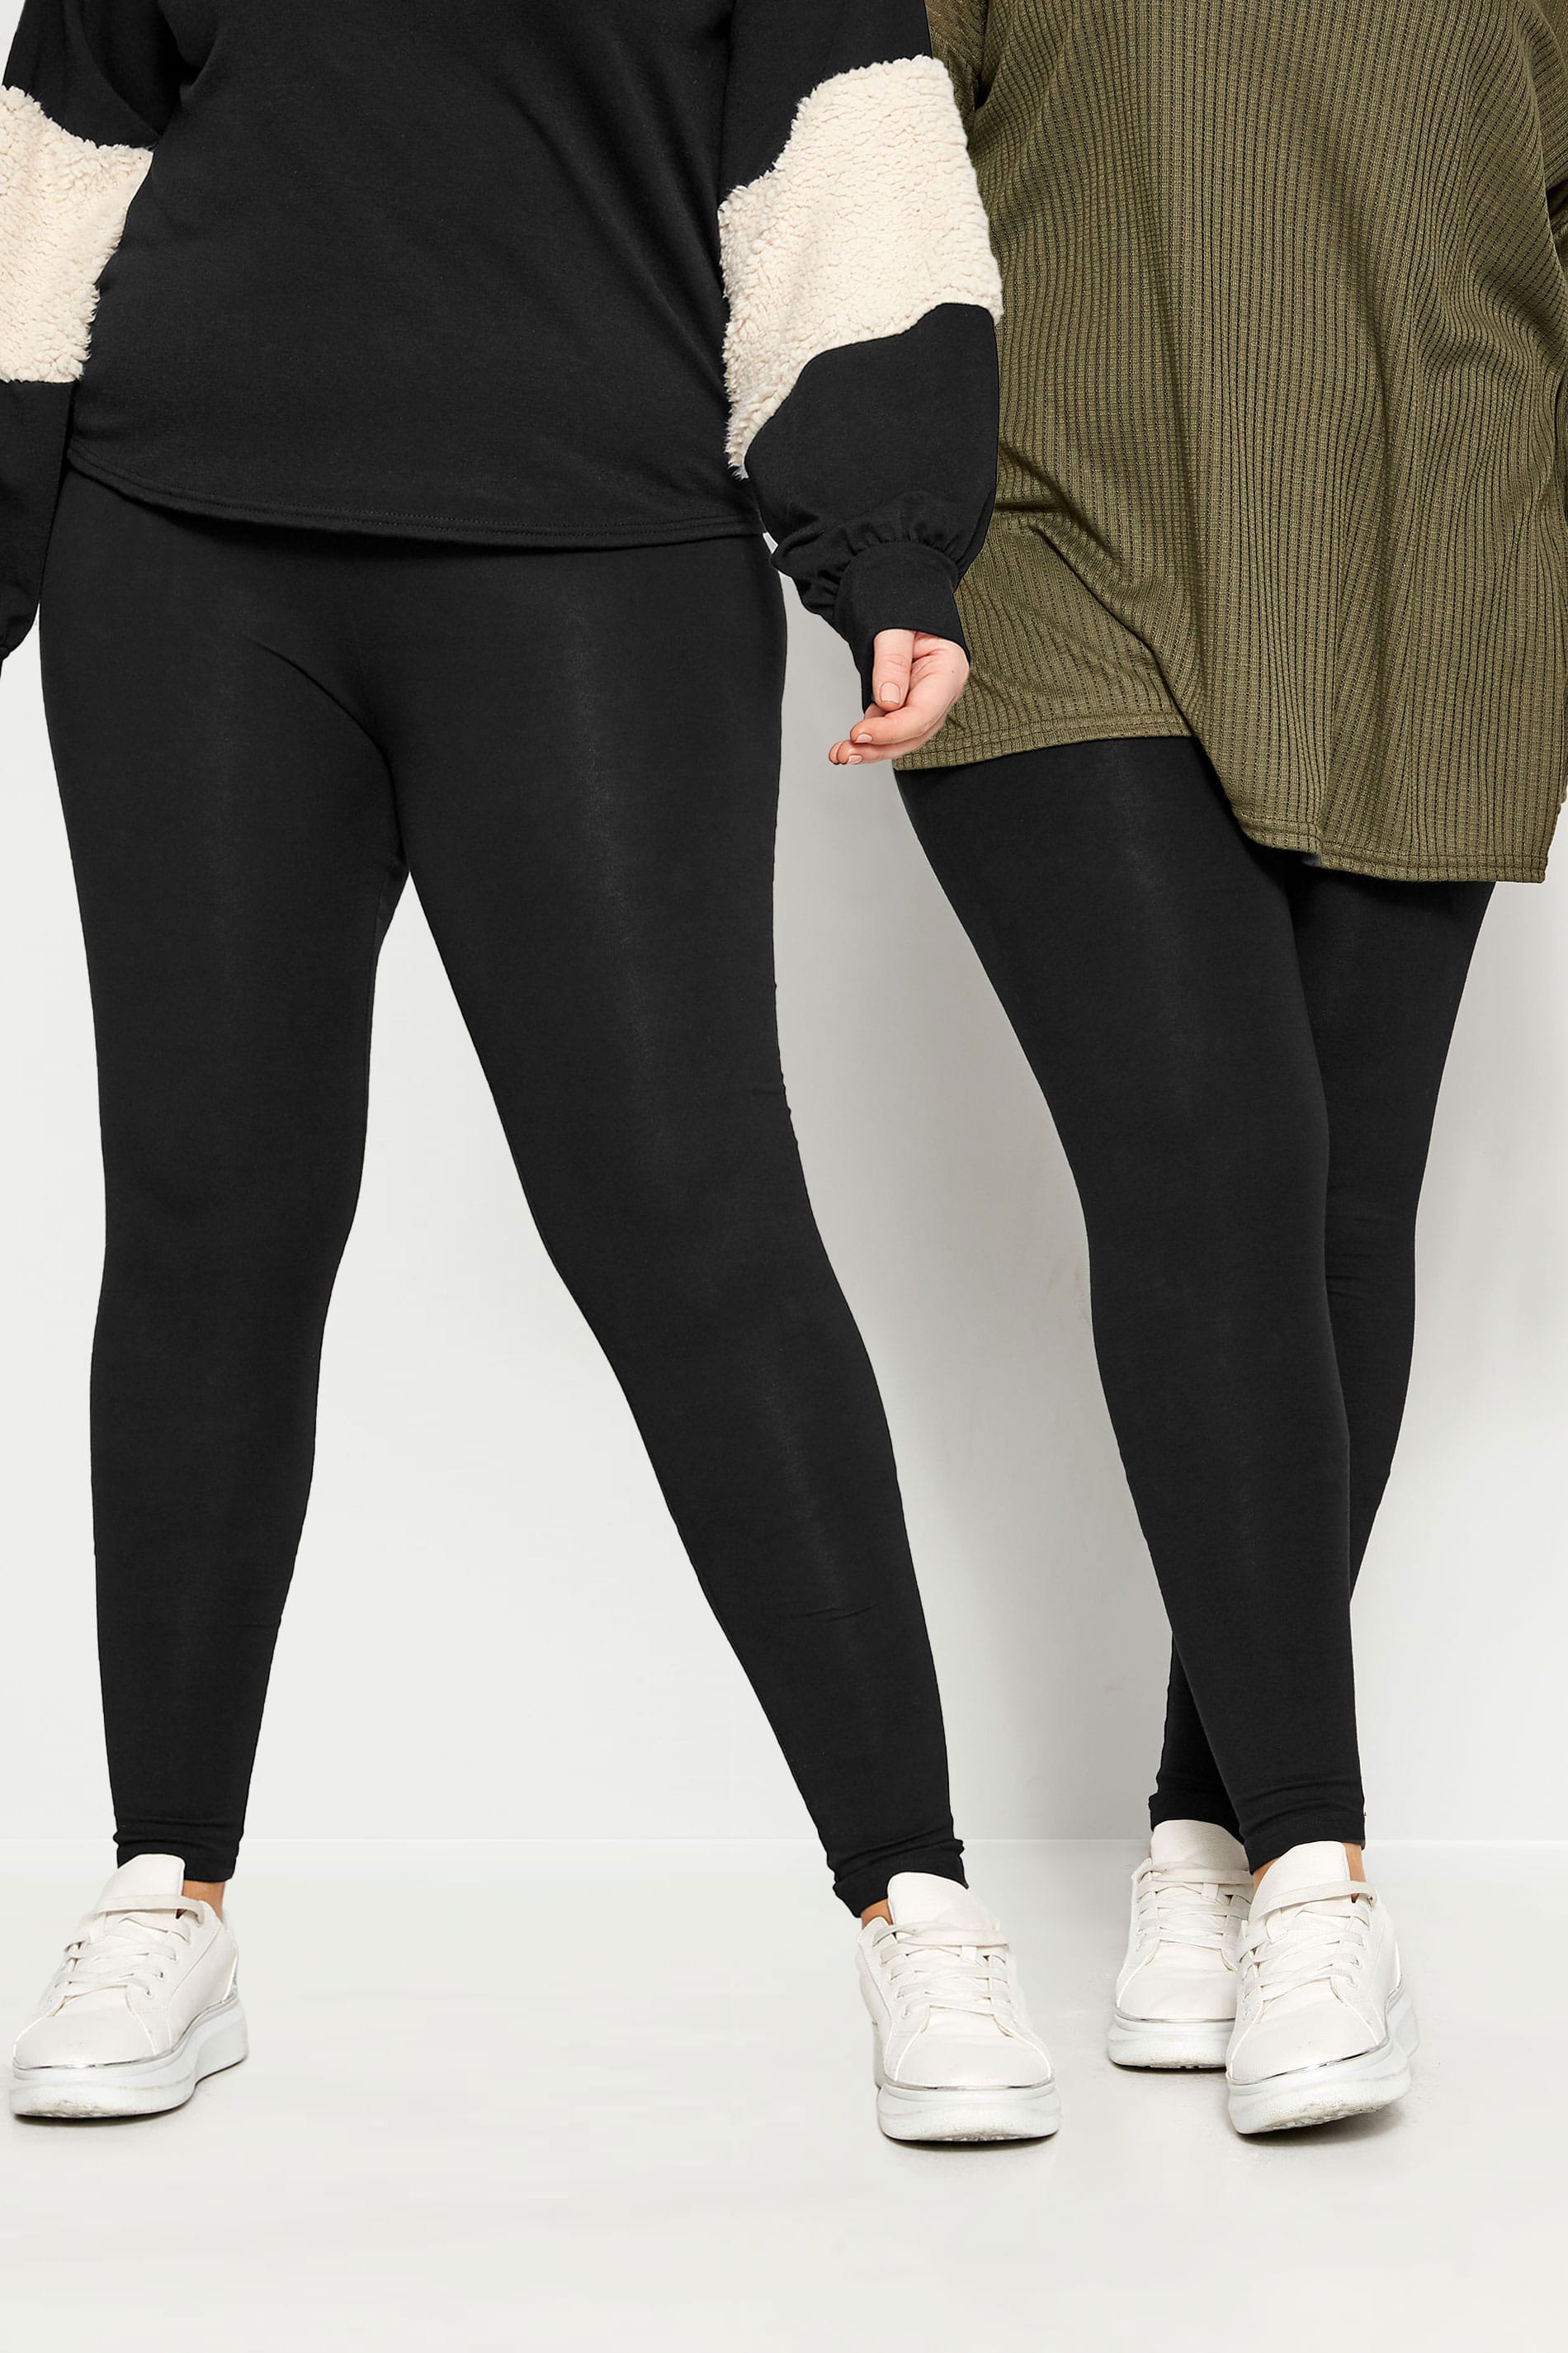 BUMP IT UP MATERNITY Black Cotton Essential Leggings With Comfort Panel Plus  Size 16 to 32